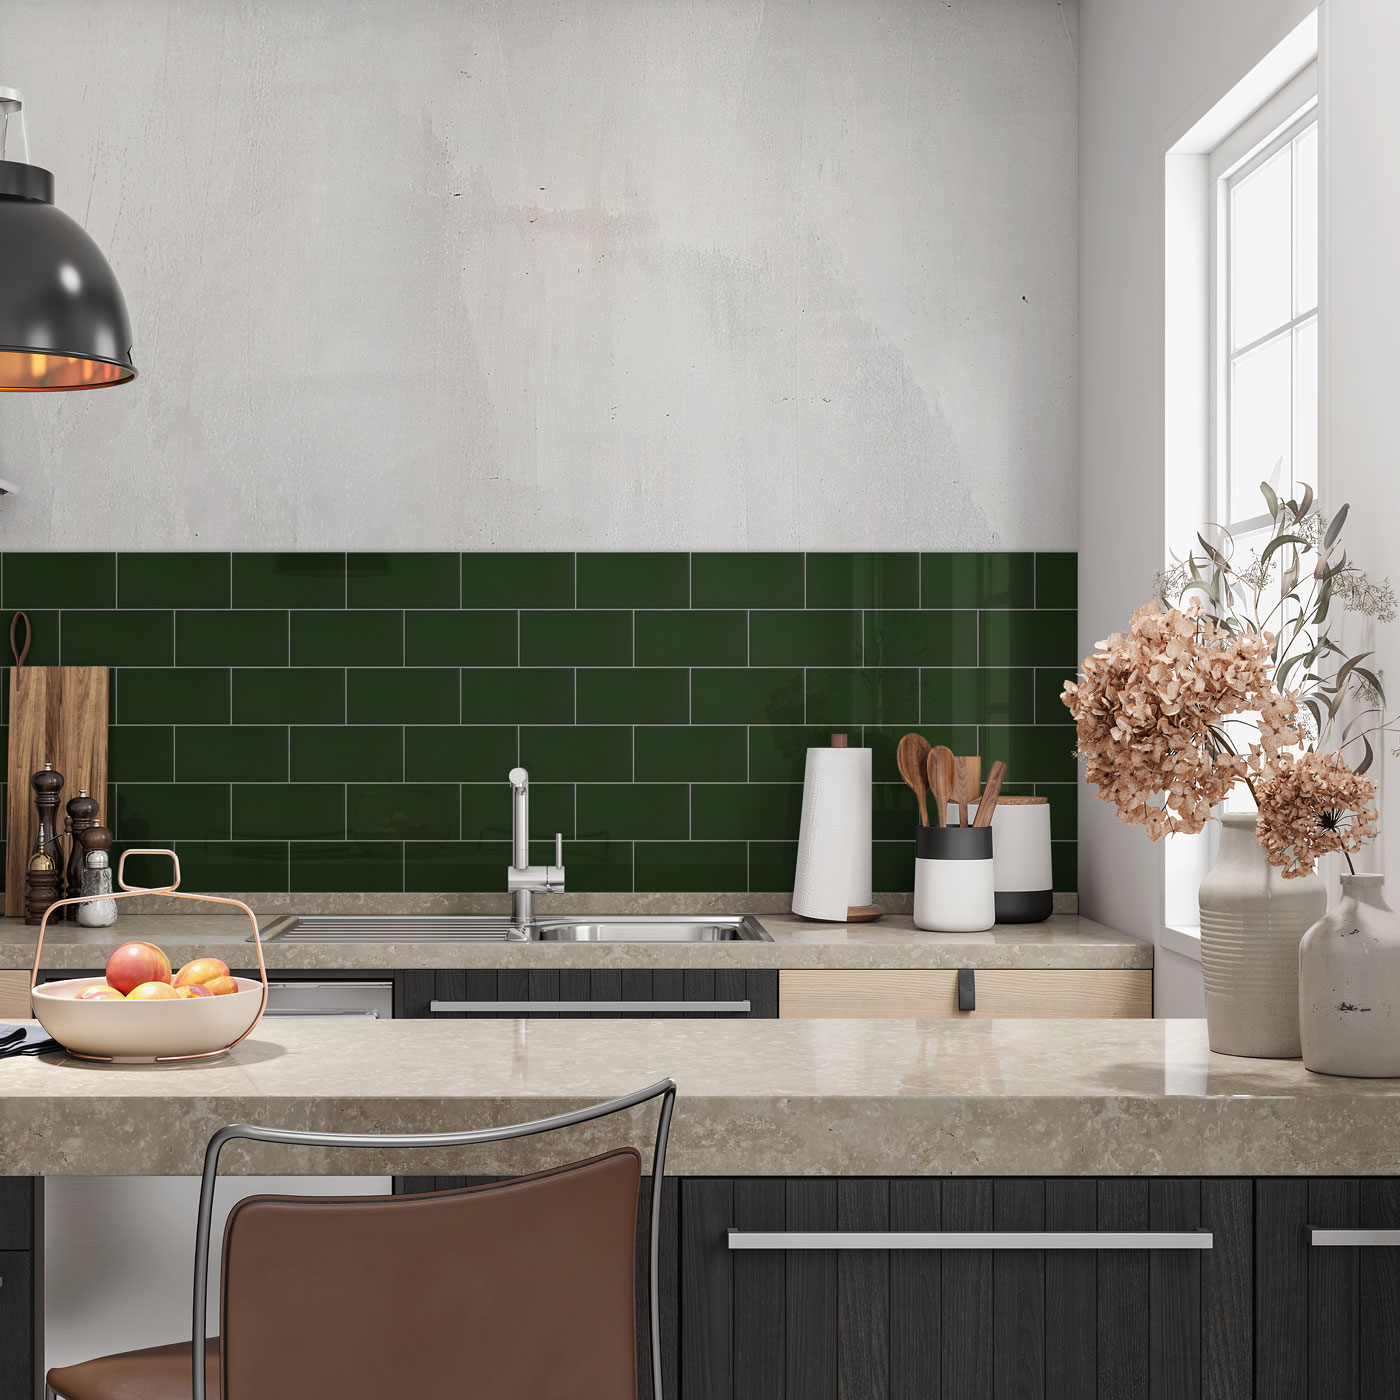 Johnsons Prismatics Gloss Victorian Green Metro Tiles used as traditional kitchen wall tiles in a rustic kitchen